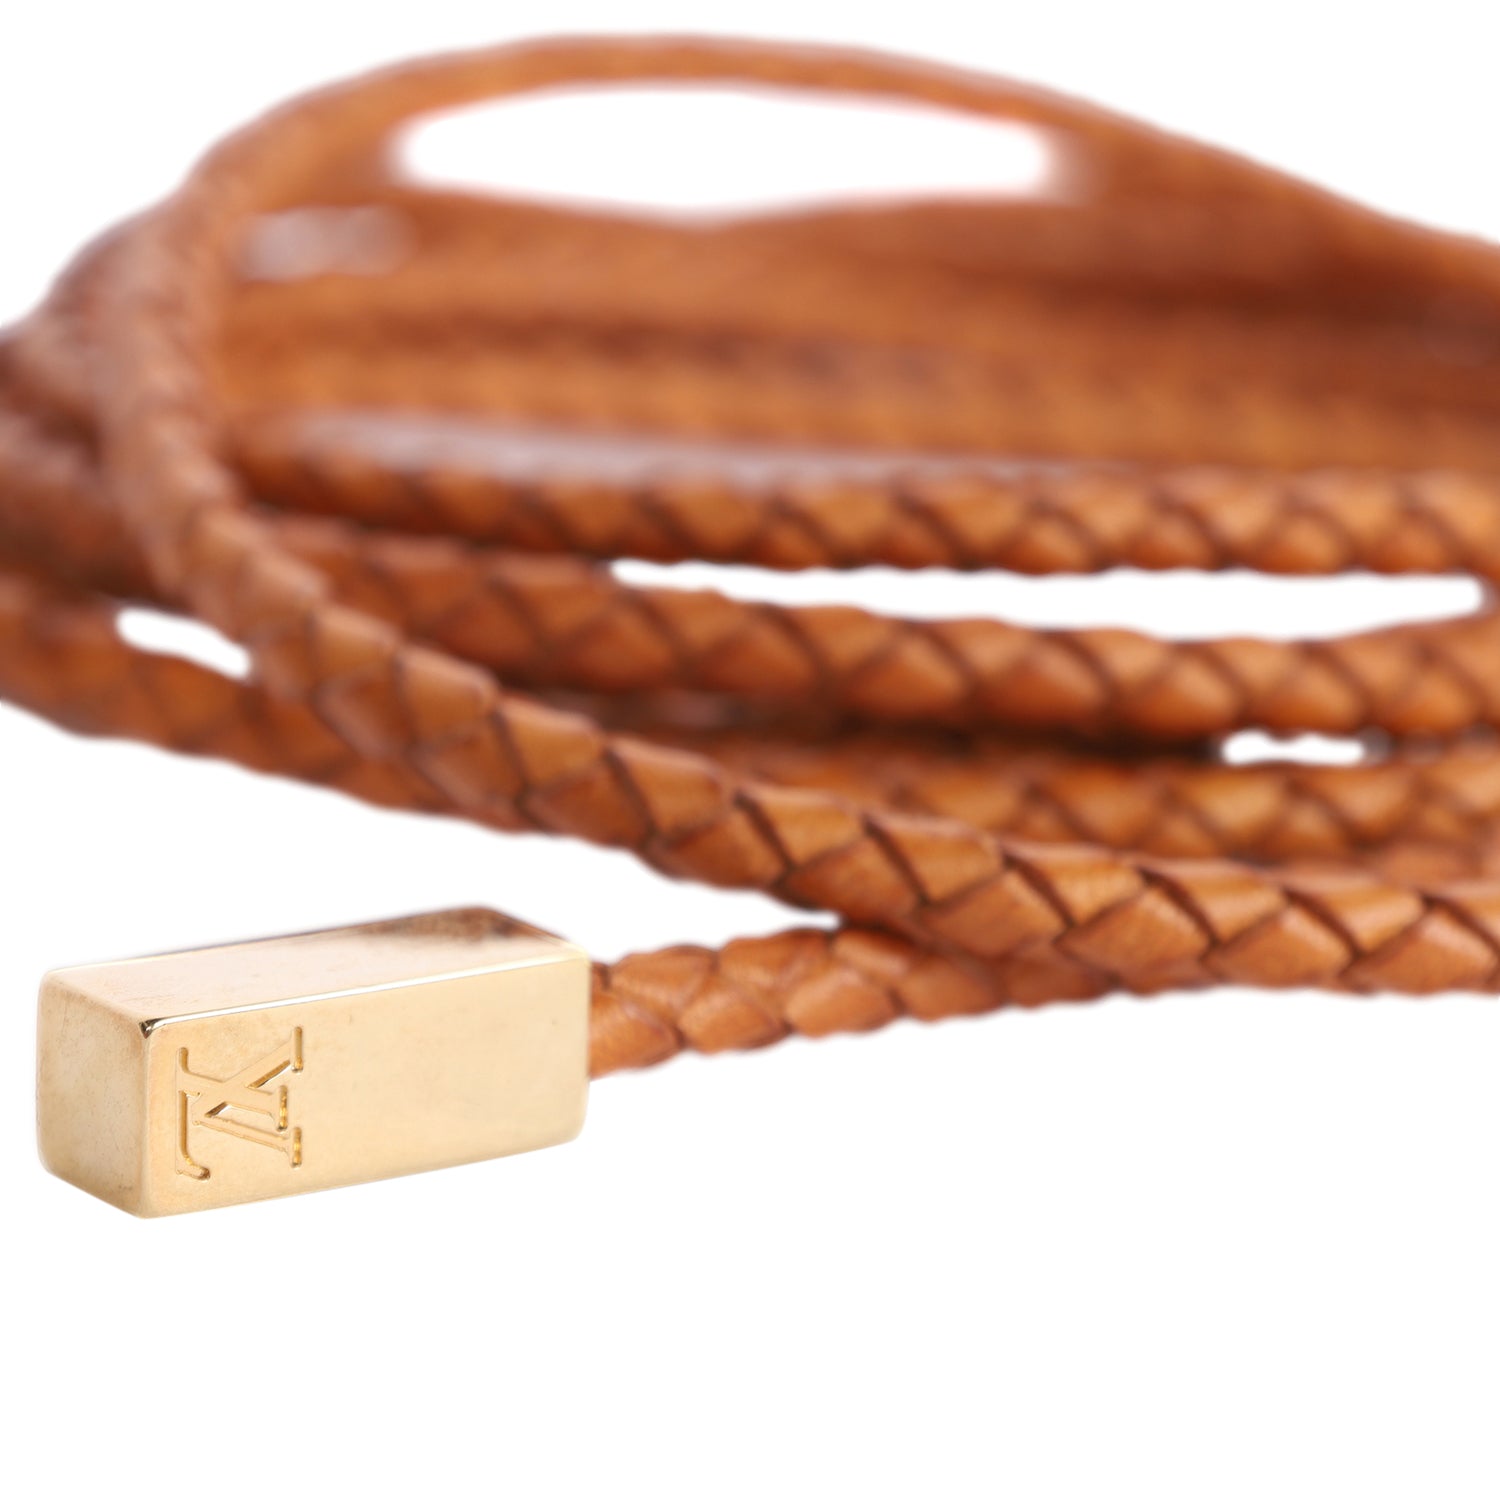 Braided Leather Belt (Authentic Pre-Owned)